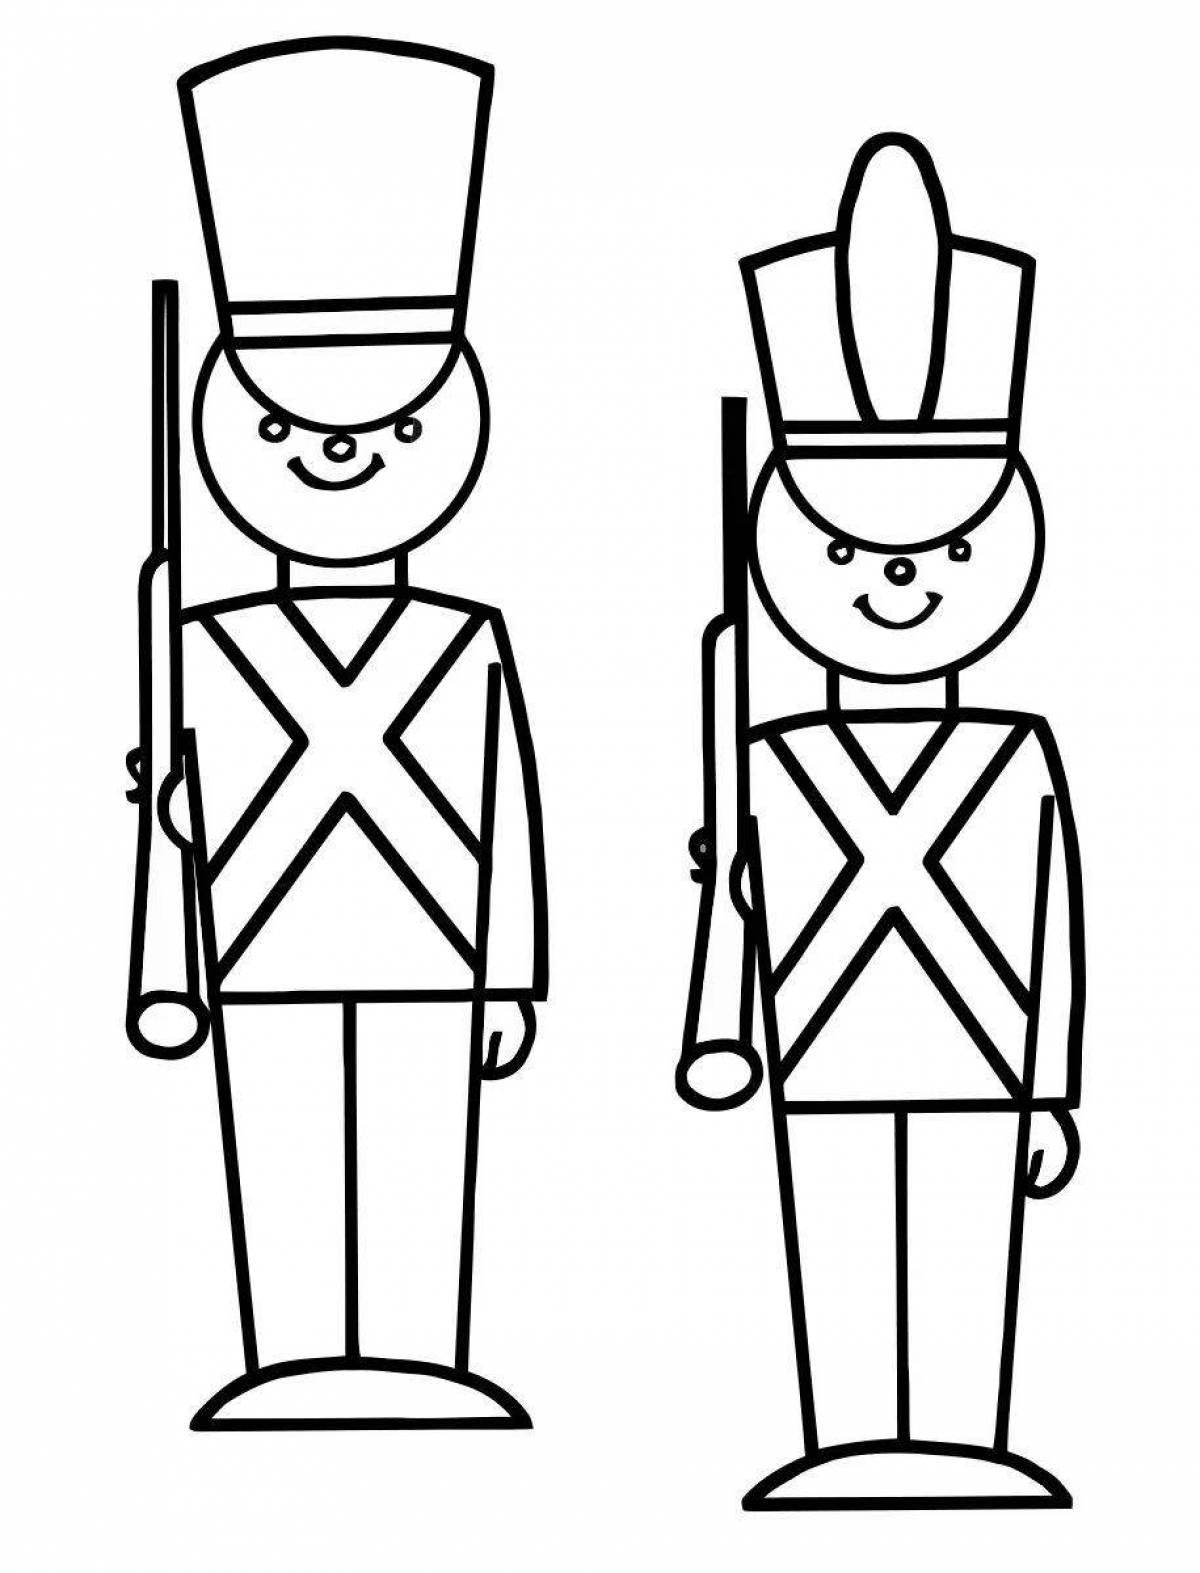 Soldier-decoration on post drawing